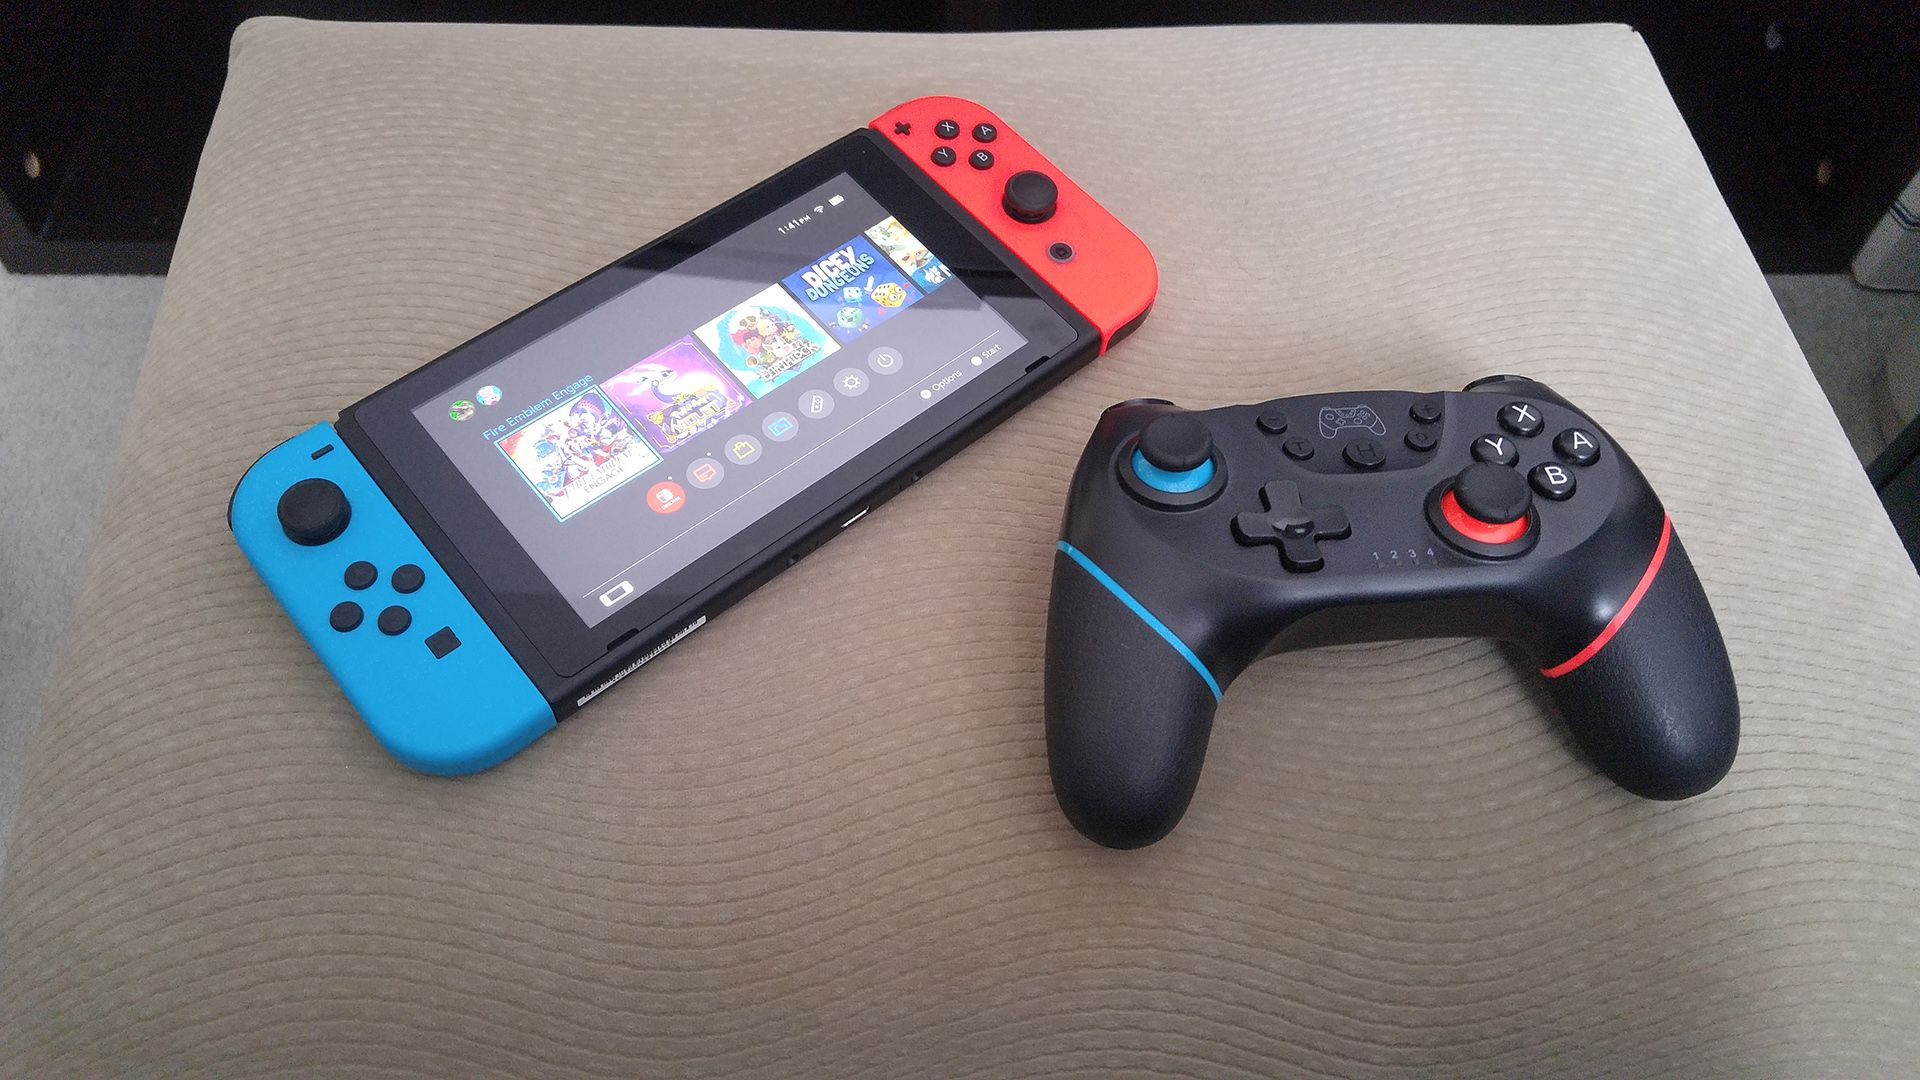 A Nintendo Switch tablet with Joy-Con controllers attached to it lying next to a Switch Pro Controller on a beige footrest.